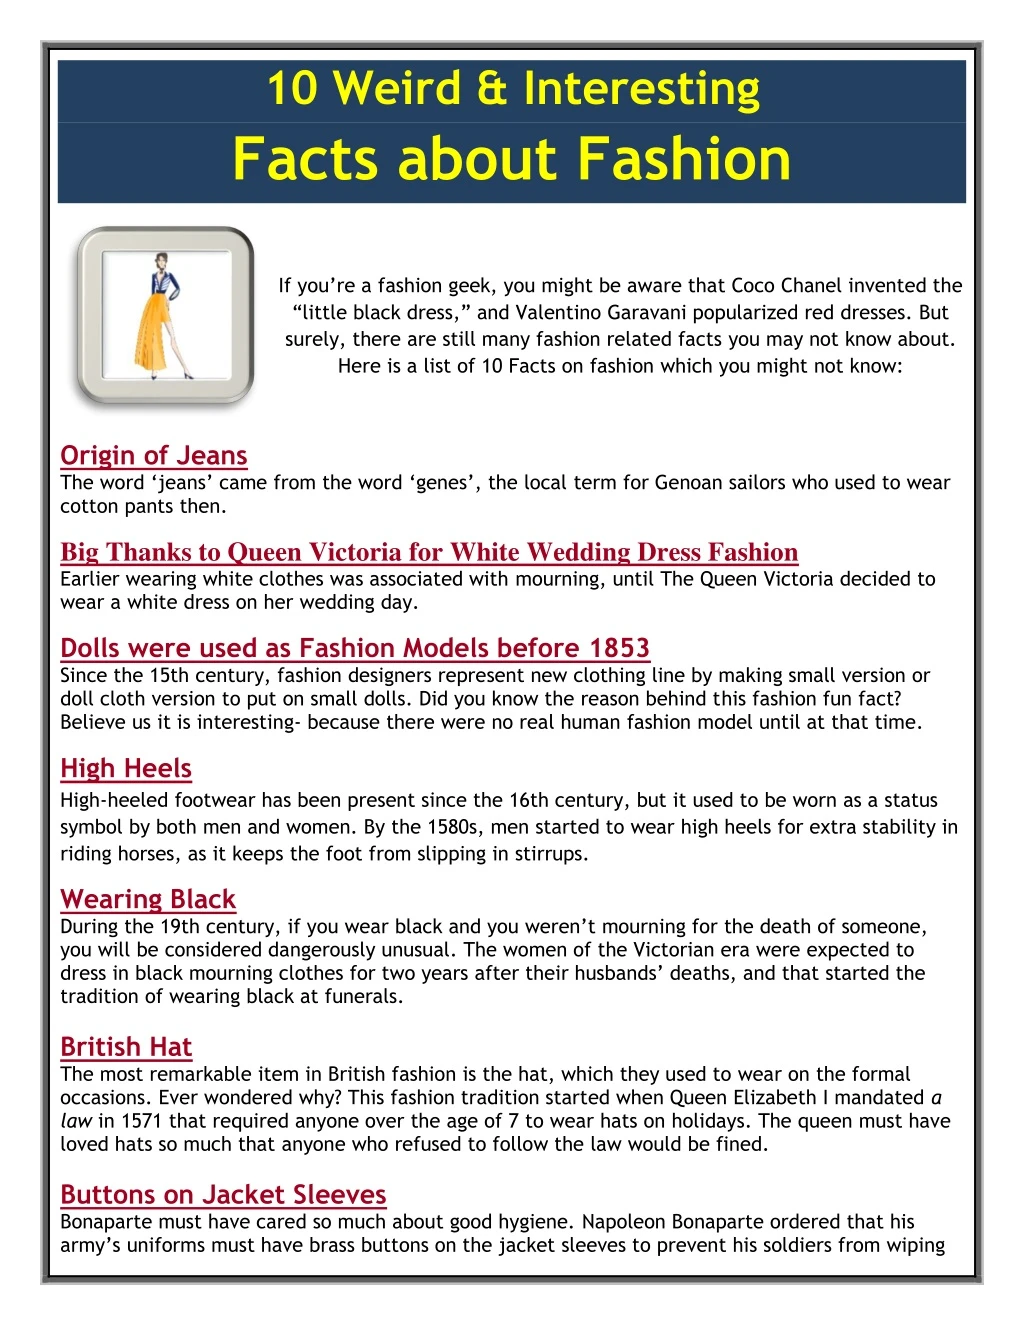 10 weird interesting facts about fashion